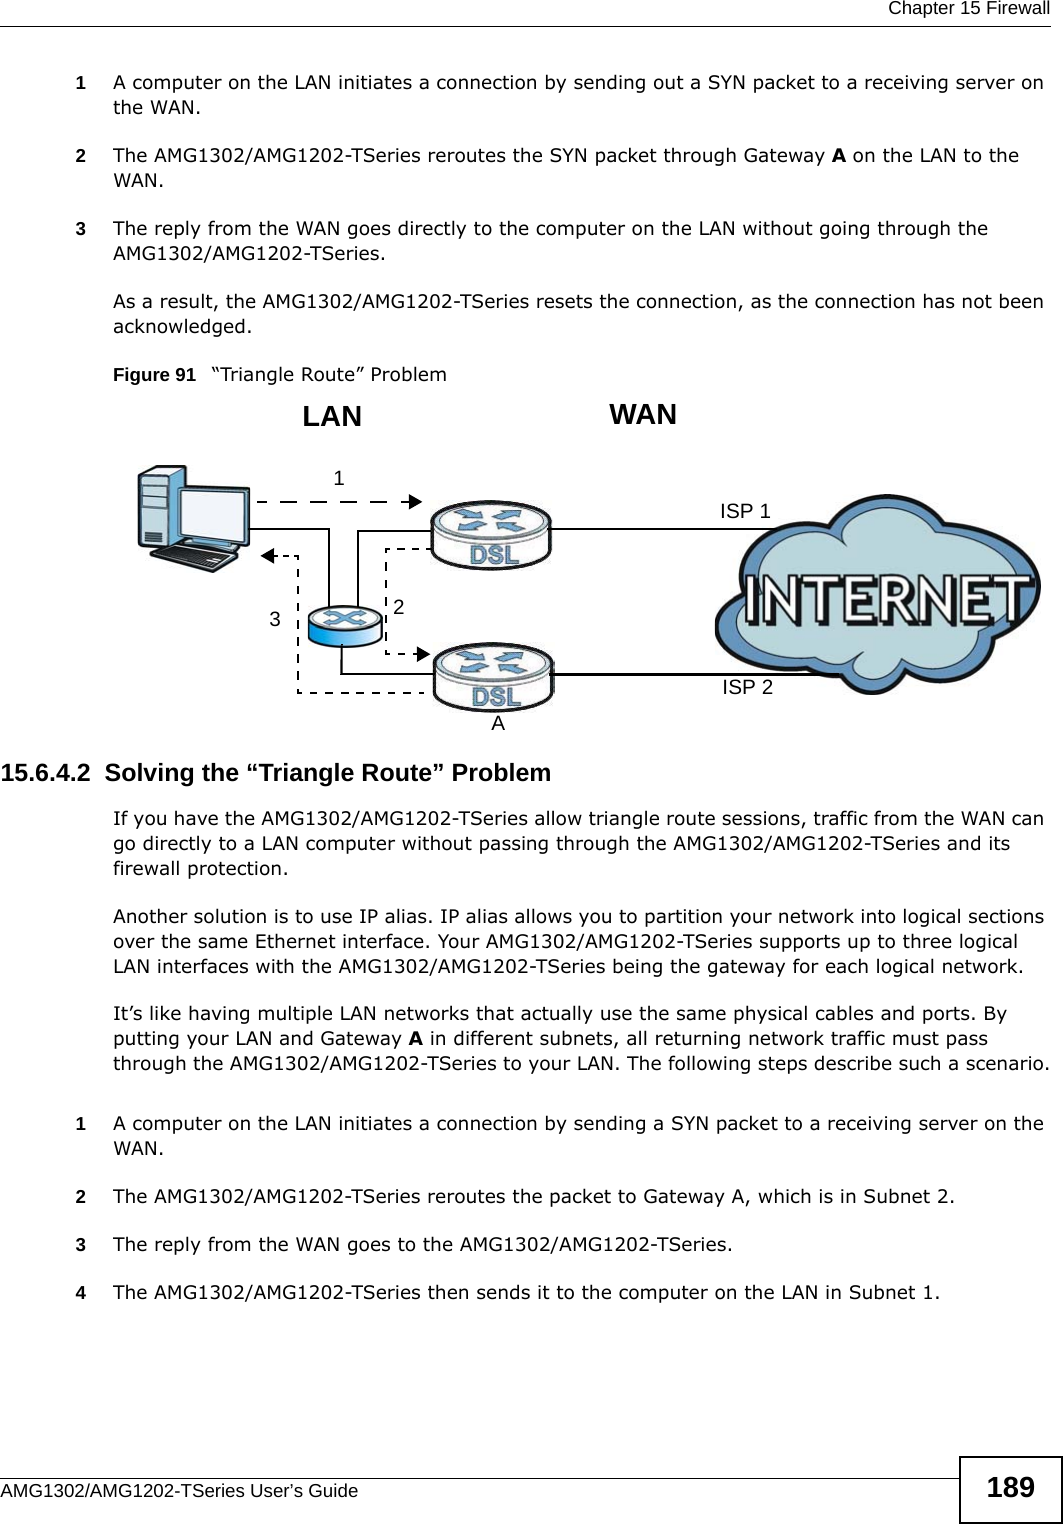  Chapter 15 FirewallAMG1302/AMG1202-TSeries User’s Guide 1891A computer on the LAN initiates a connection by sending out a SYN packet to a receiving server on the WAN.2The AMG1302/AMG1202-TSeries reroutes the SYN packet through Gateway A on the LAN to the WAN. 3The reply from the WAN goes directly to the computer on the LAN without going through the AMG1302/AMG1202-TSeries. As a result, the AMG1302/AMG1202-TSeries resets the connection, as the connection has not been acknowledged.Figure 91   “Triangle Route” Problem15.6.4.2  Solving the “Triangle Route” ProblemIf you have the AMG1302/AMG1202-TSeries allow triangle route sessions, traffic from the WAN can go directly to a LAN computer without passing through the AMG1302/AMG1202-TSeries and its firewall protection. Another solution is to use IP alias. IP alias allows you to partition your network into logical sections over the same Ethernet interface. Your AMG1302/AMG1202-TSeries supports up to three logical LAN interfaces with the AMG1302/AMG1202-TSeries being the gateway for each logical network. It’s like having multiple LAN networks that actually use the same physical cables and ports. By putting your LAN and Gateway A in different subnets, all returning network traffic must pass through the AMG1302/AMG1202-TSeries to your LAN. The following steps describe such a scenario.1A computer on the LAN initiates a connection by sending a SYN packet to a receiving server on the WAN. 2The AMG1302/AMG1202-TSeries reroutes the packet to Gateway A, which is in Subnet 2. 3The reply from the WAN goes to the AMG1302/AMG1202-TSeries. 4The AMG1302/AMG1202-TSeries then sends it to the computer on the LAN in Subnet 1.123WANLANAISP 1ISP 2